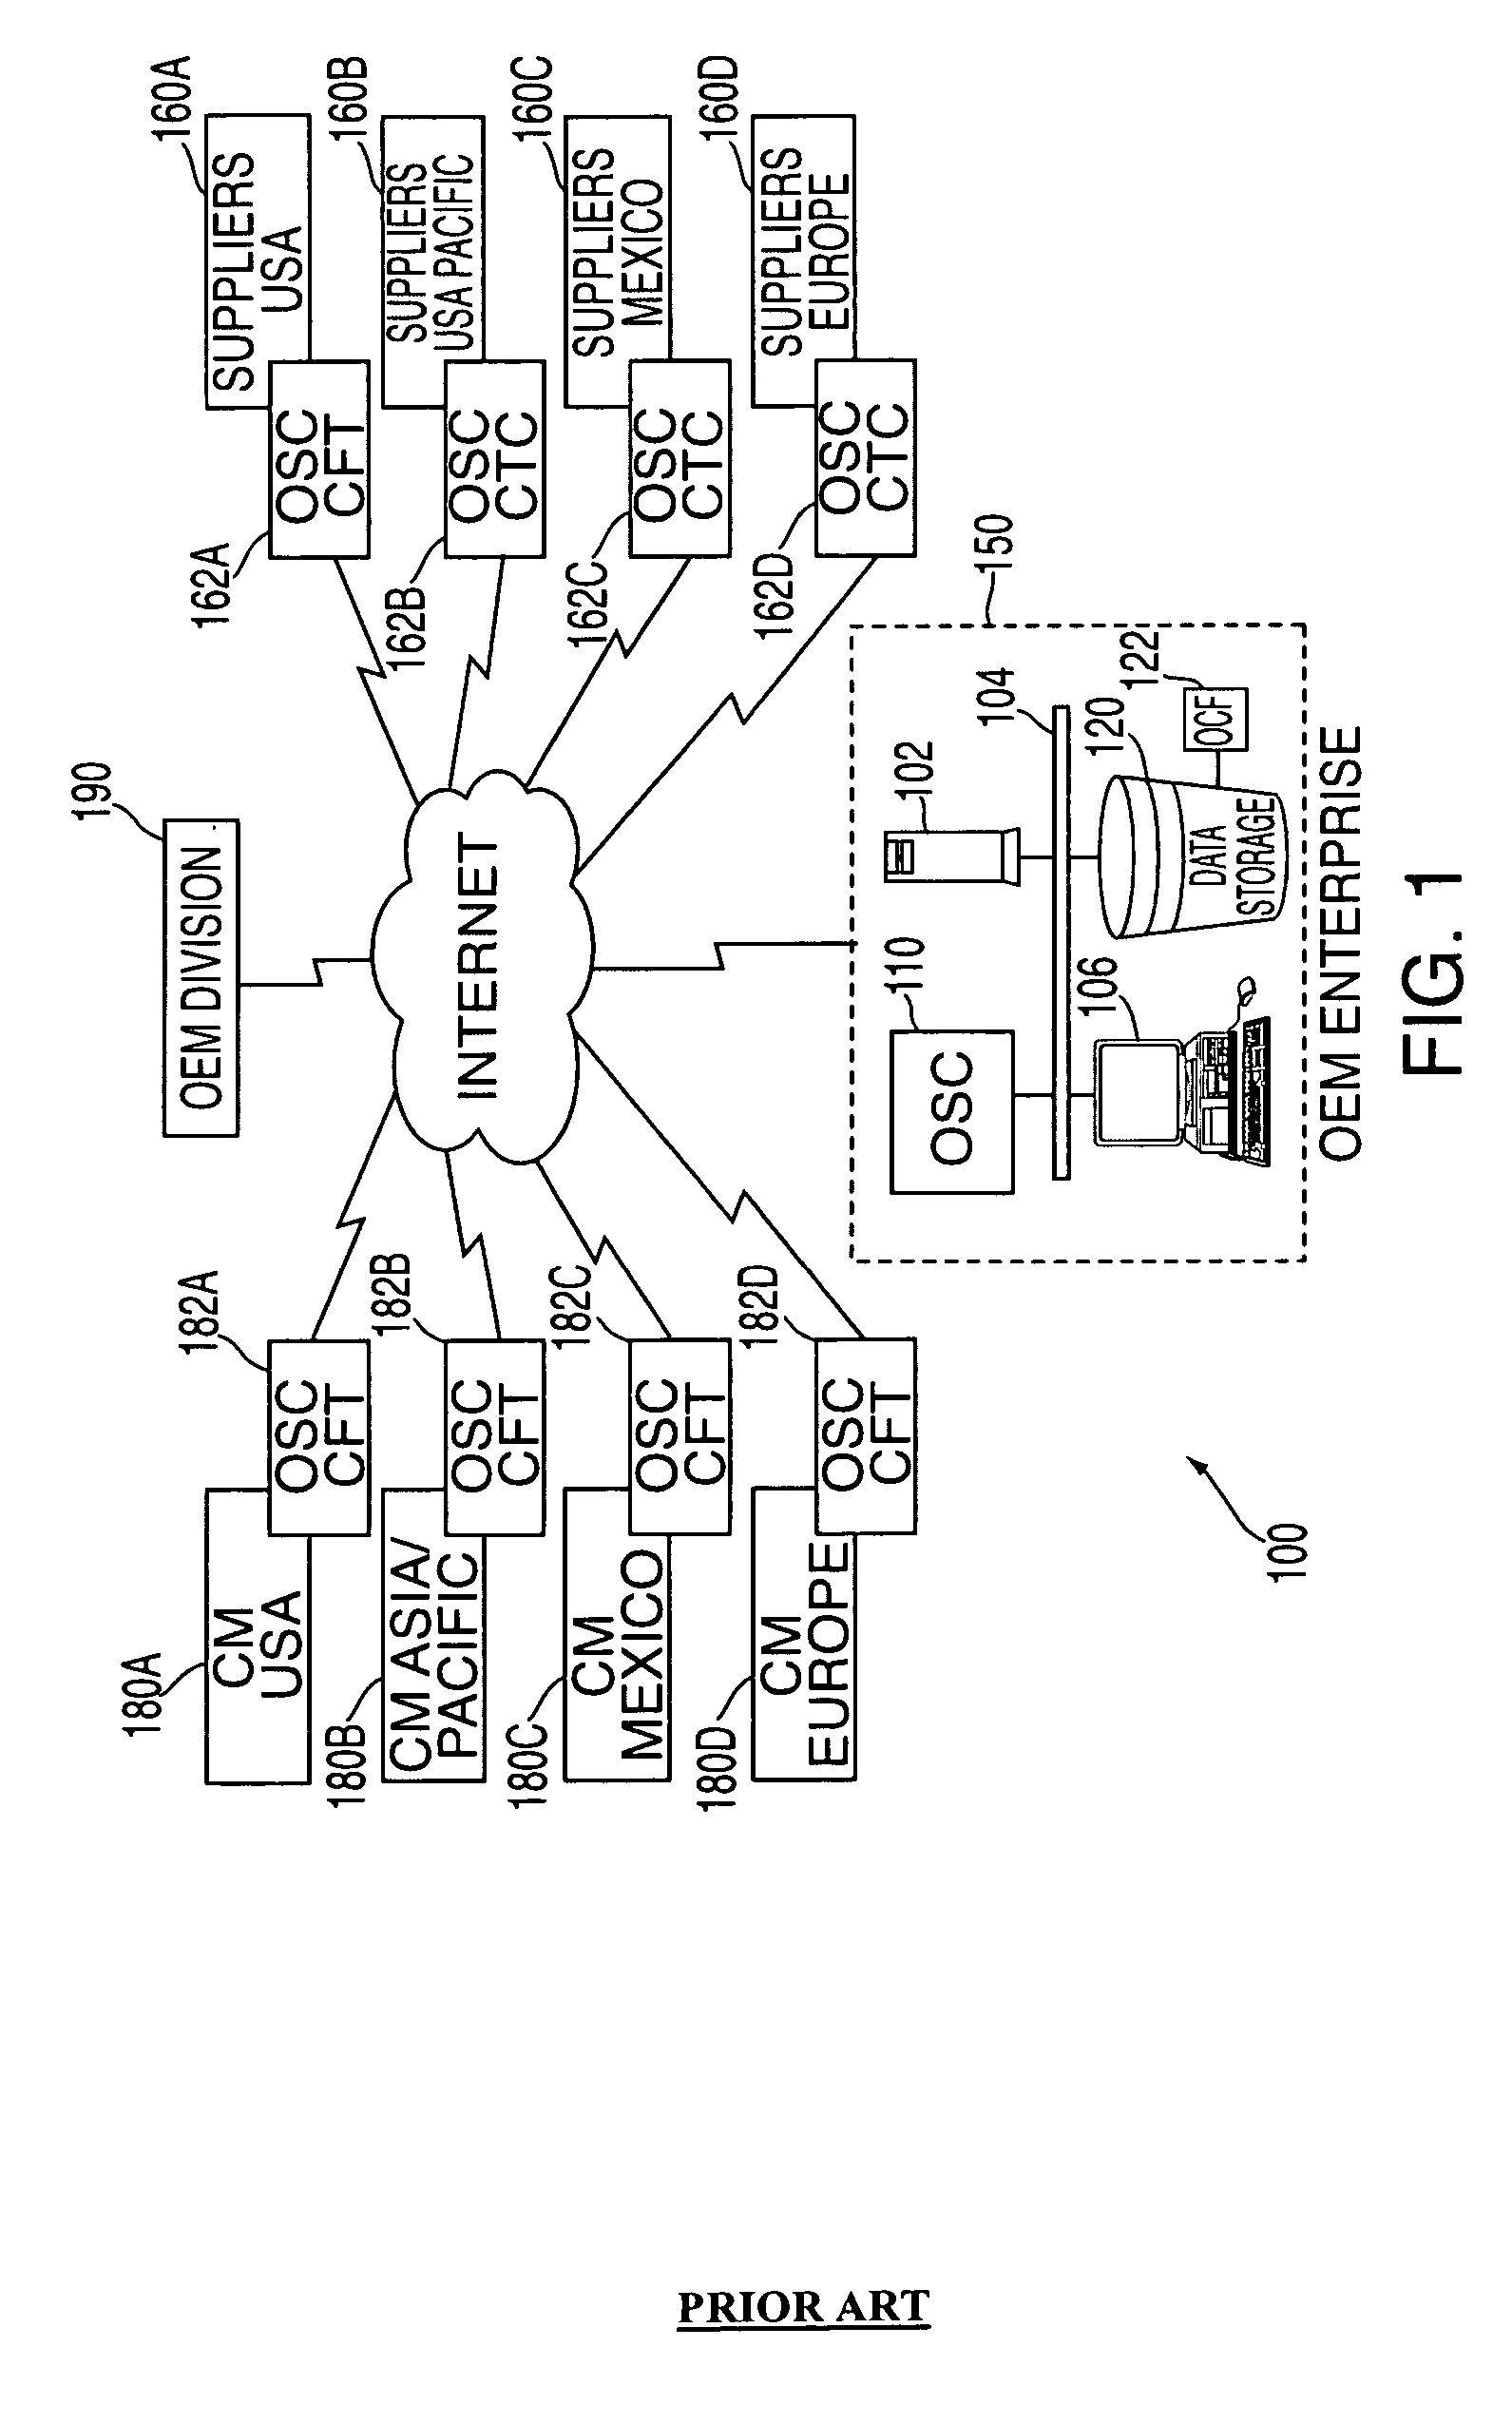 Enhanced method and computer program product for providing supply chain execution processes in an outsourced manufacturing environment